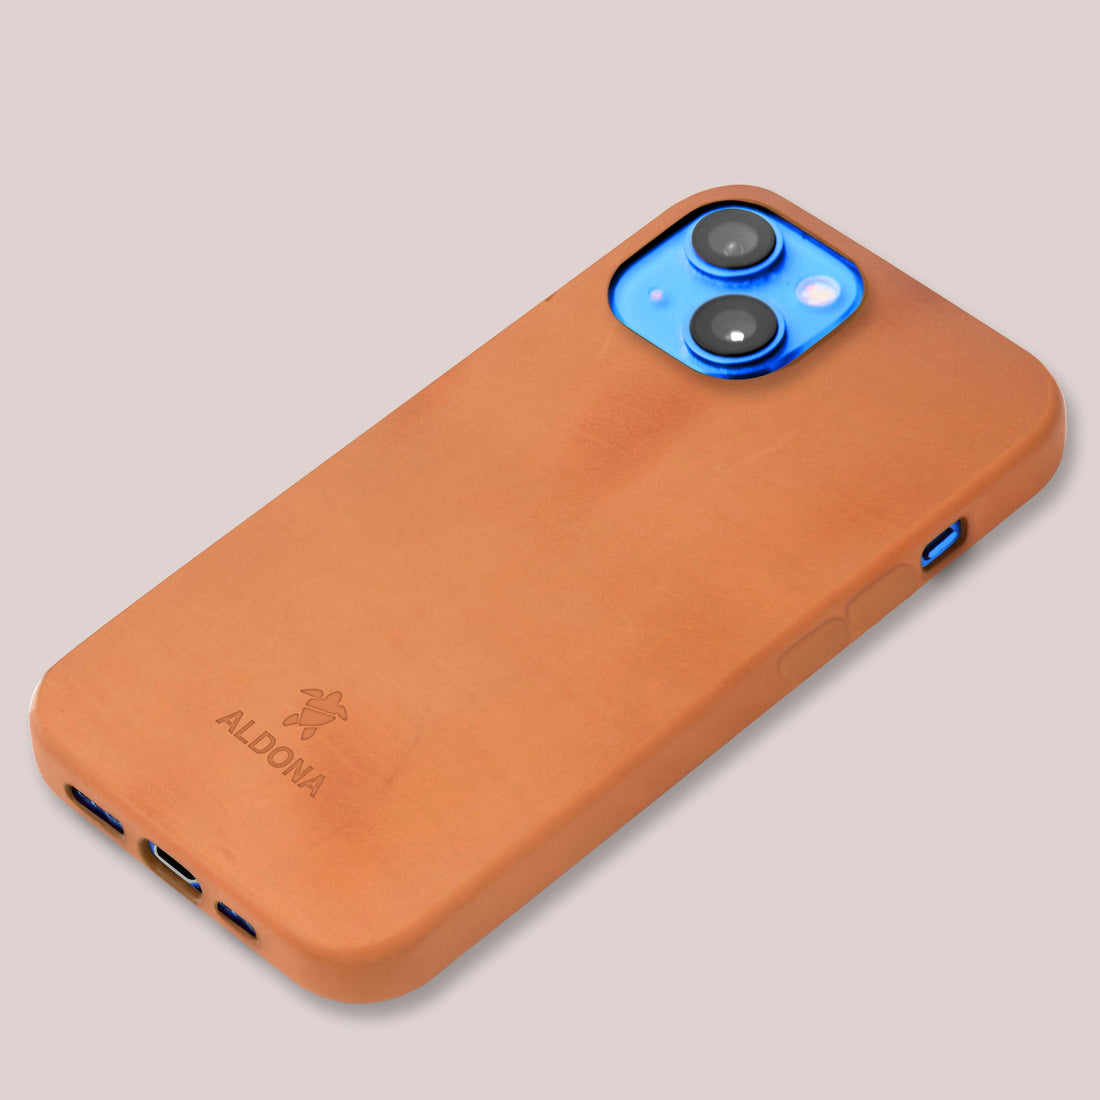 Kalon Case for iPhone 12 series with MagSafe Compatibility - Cognac